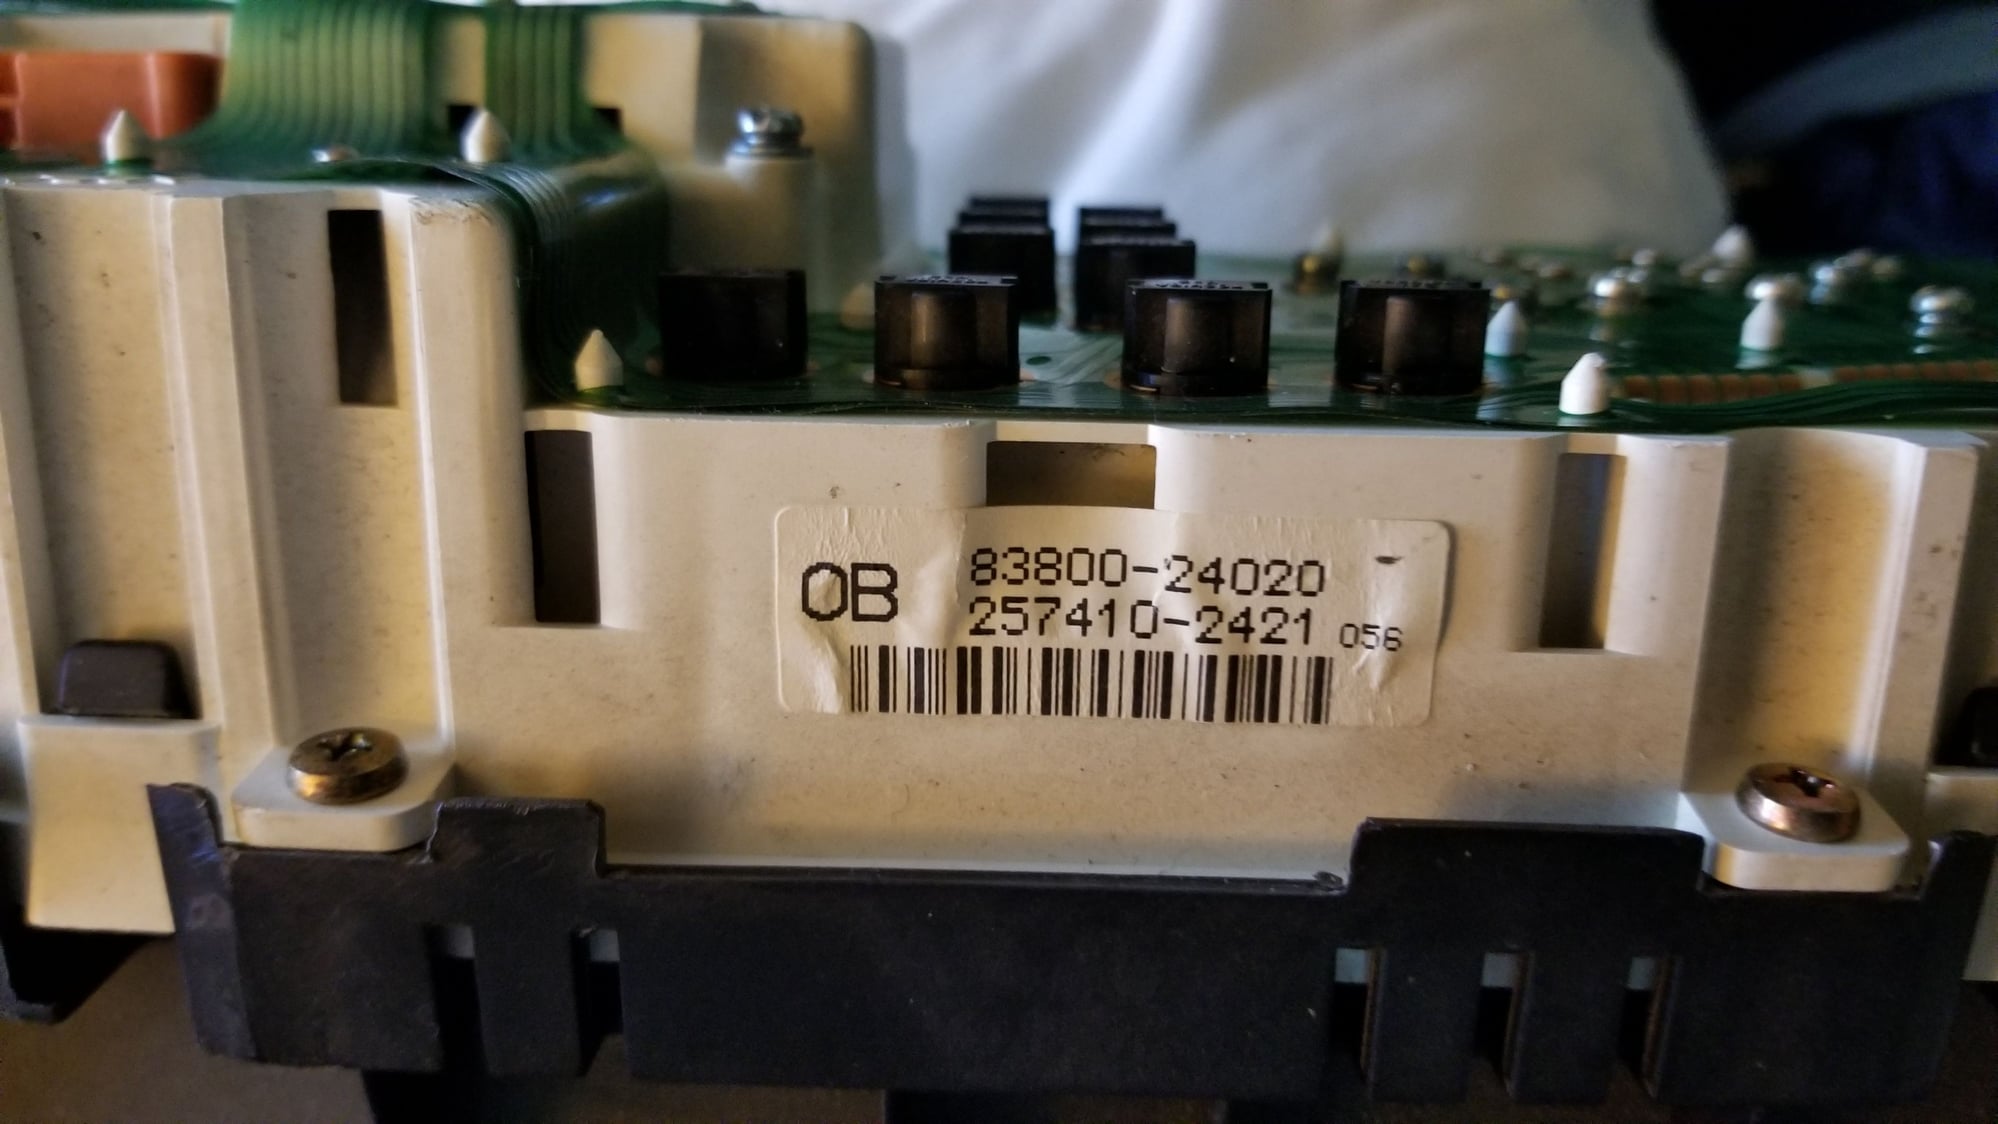 Miscellaneous - 97 SC300 Automatic Instrument cluster $150 - Used - 1997 Lexus SC300 - Madison, WI 53719, United States